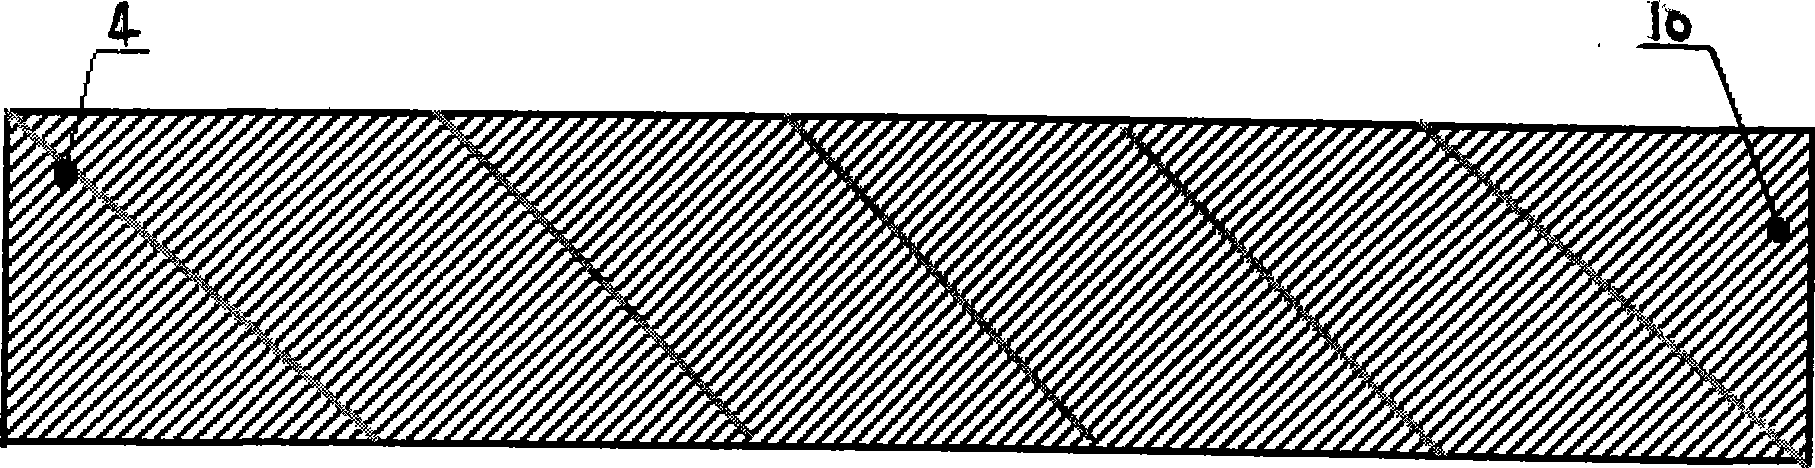 Method for producing bamboo thread sheet material